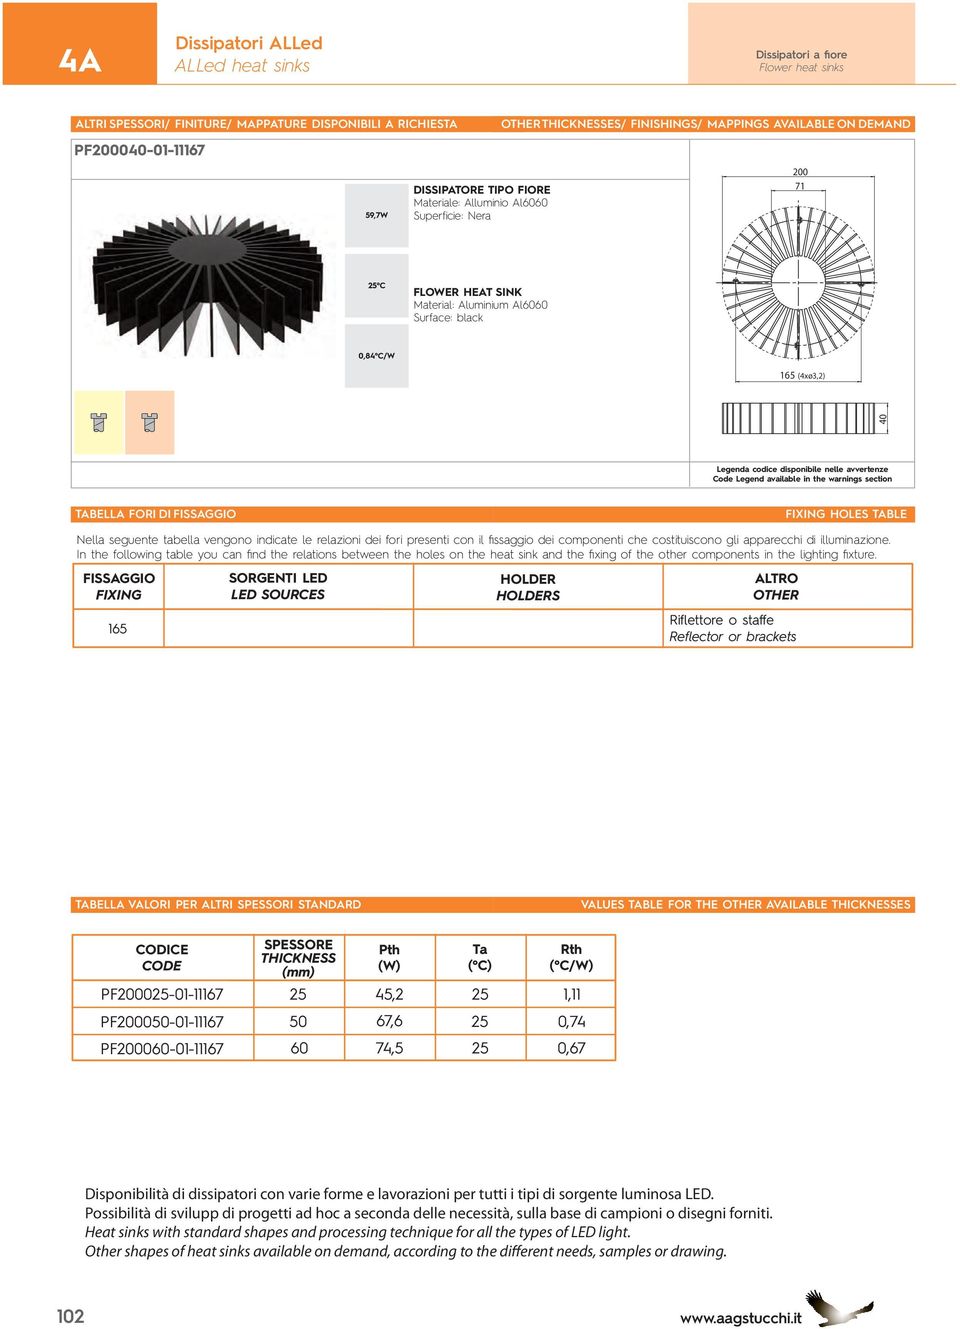 costituiscono gli apparecchi di illuminazione. In the following table you can find the relations between the holes on the heat sink and the fixing of the other components in the lighting fixture.